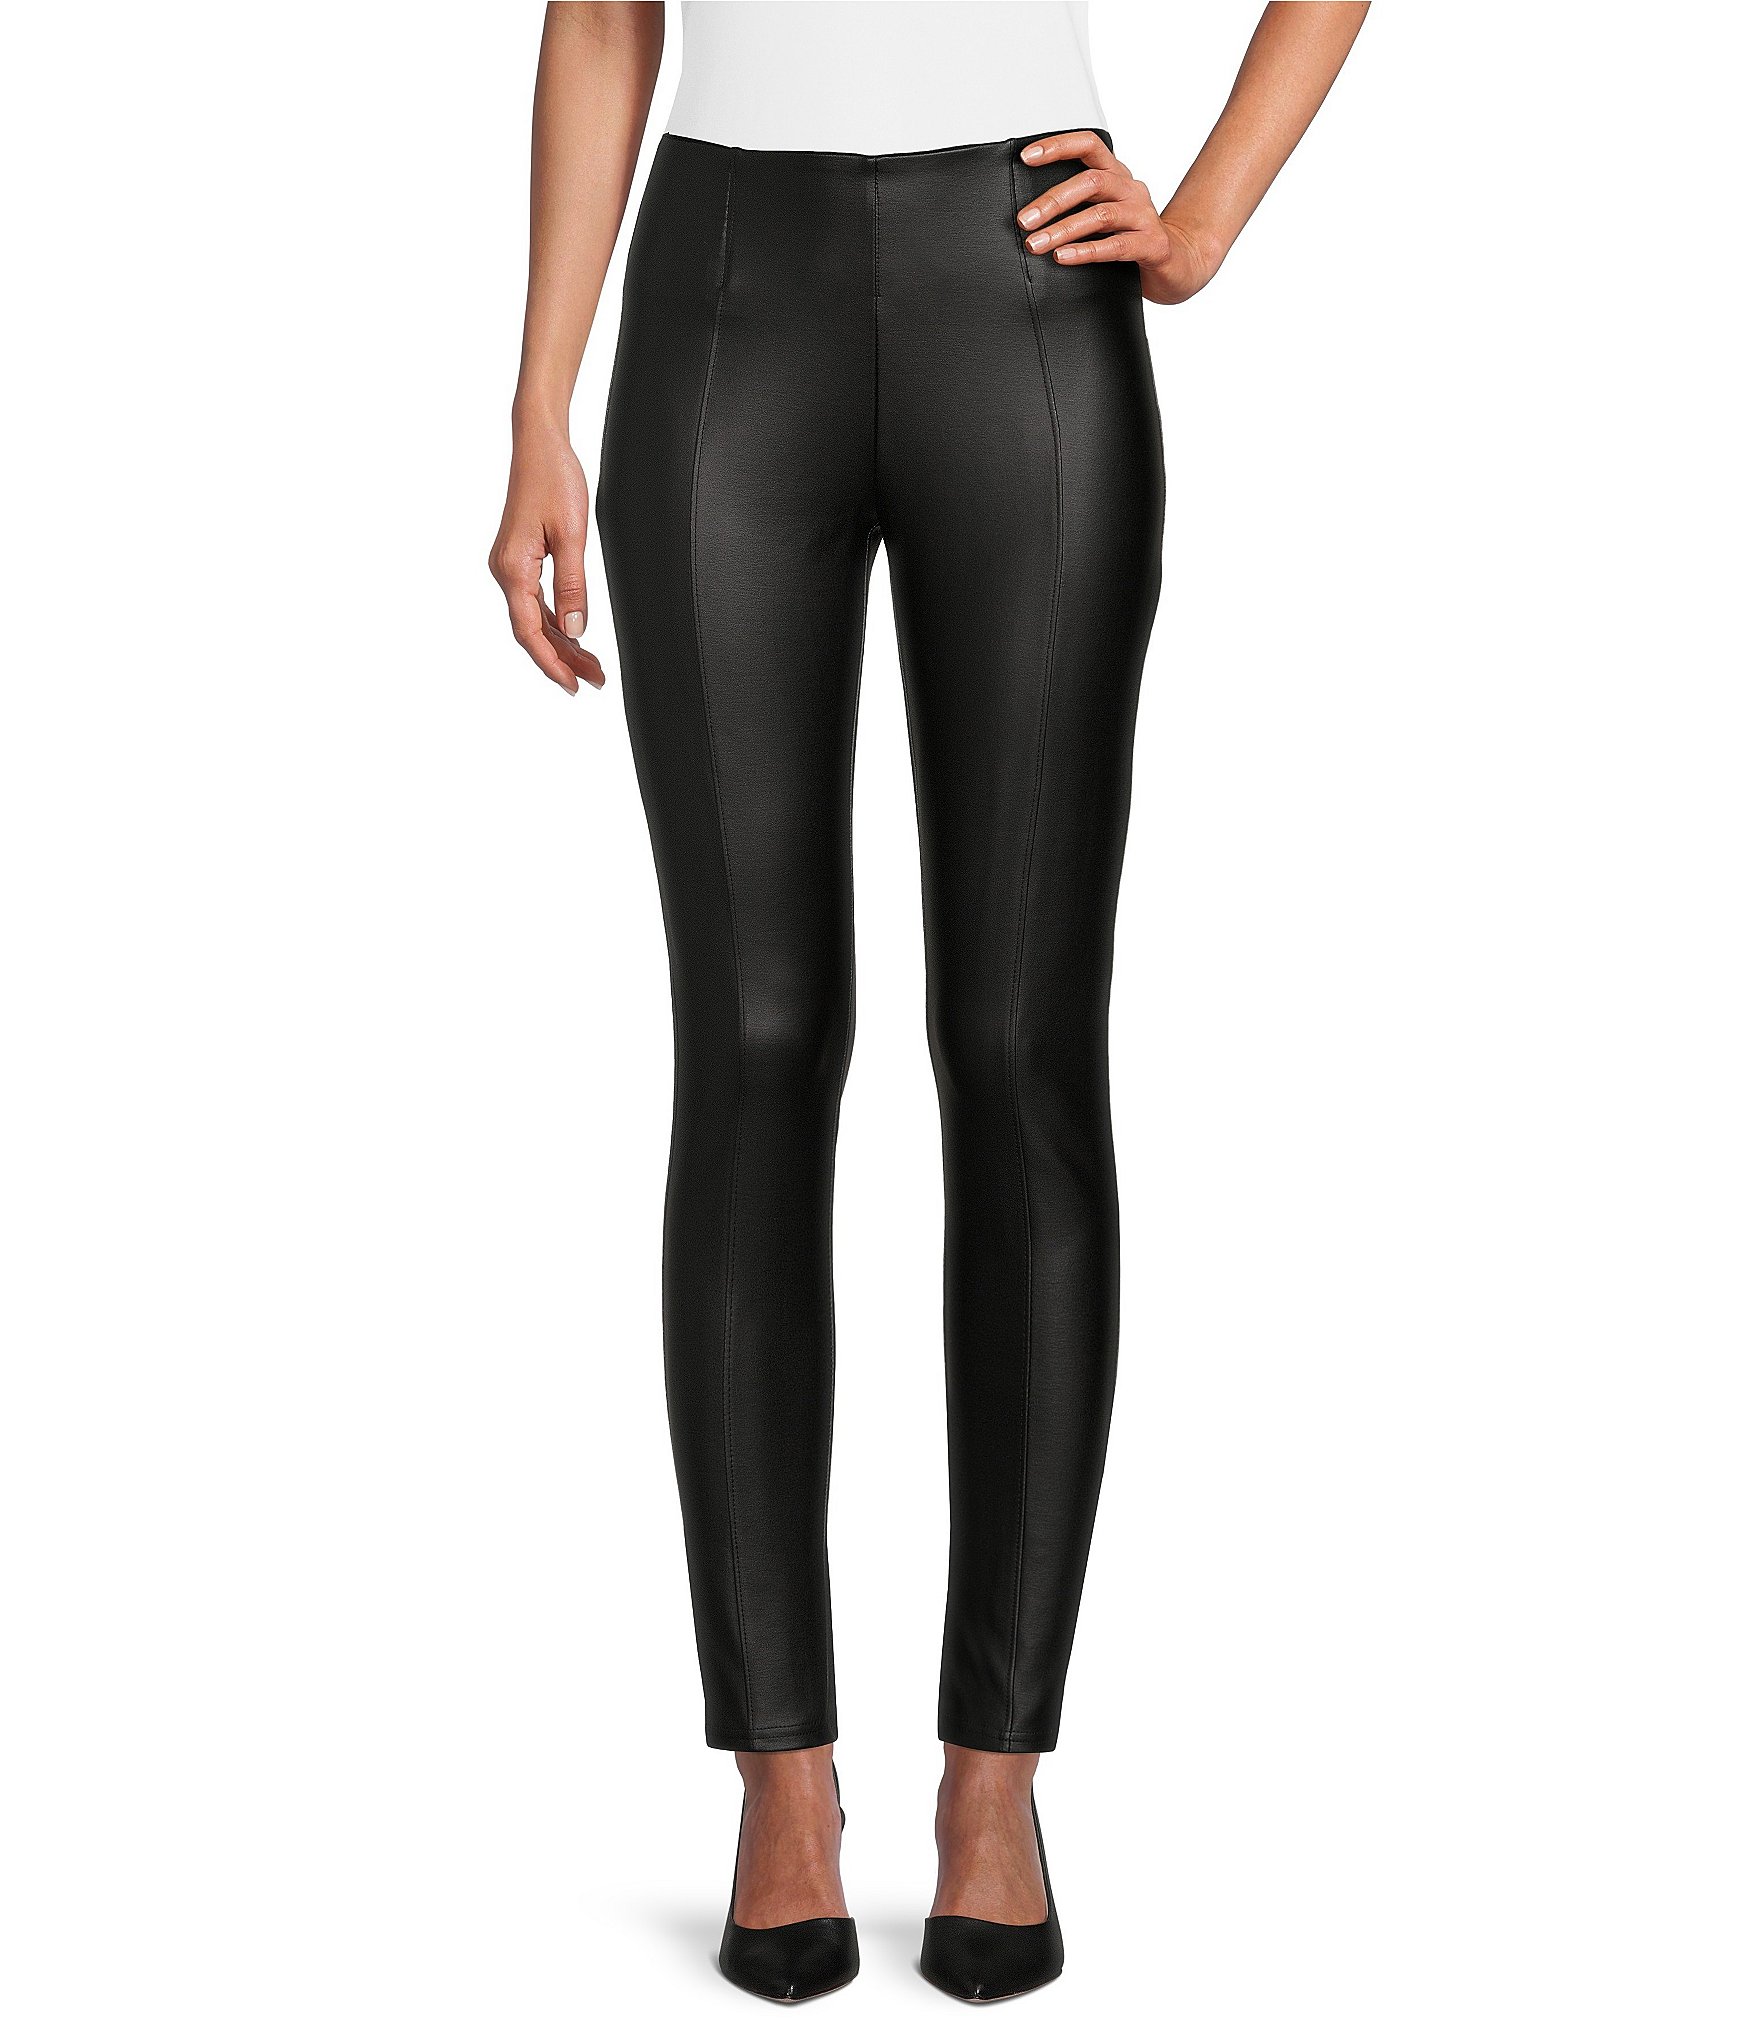 Trying and reviewing the M&S leather ponte leggingsbe quick